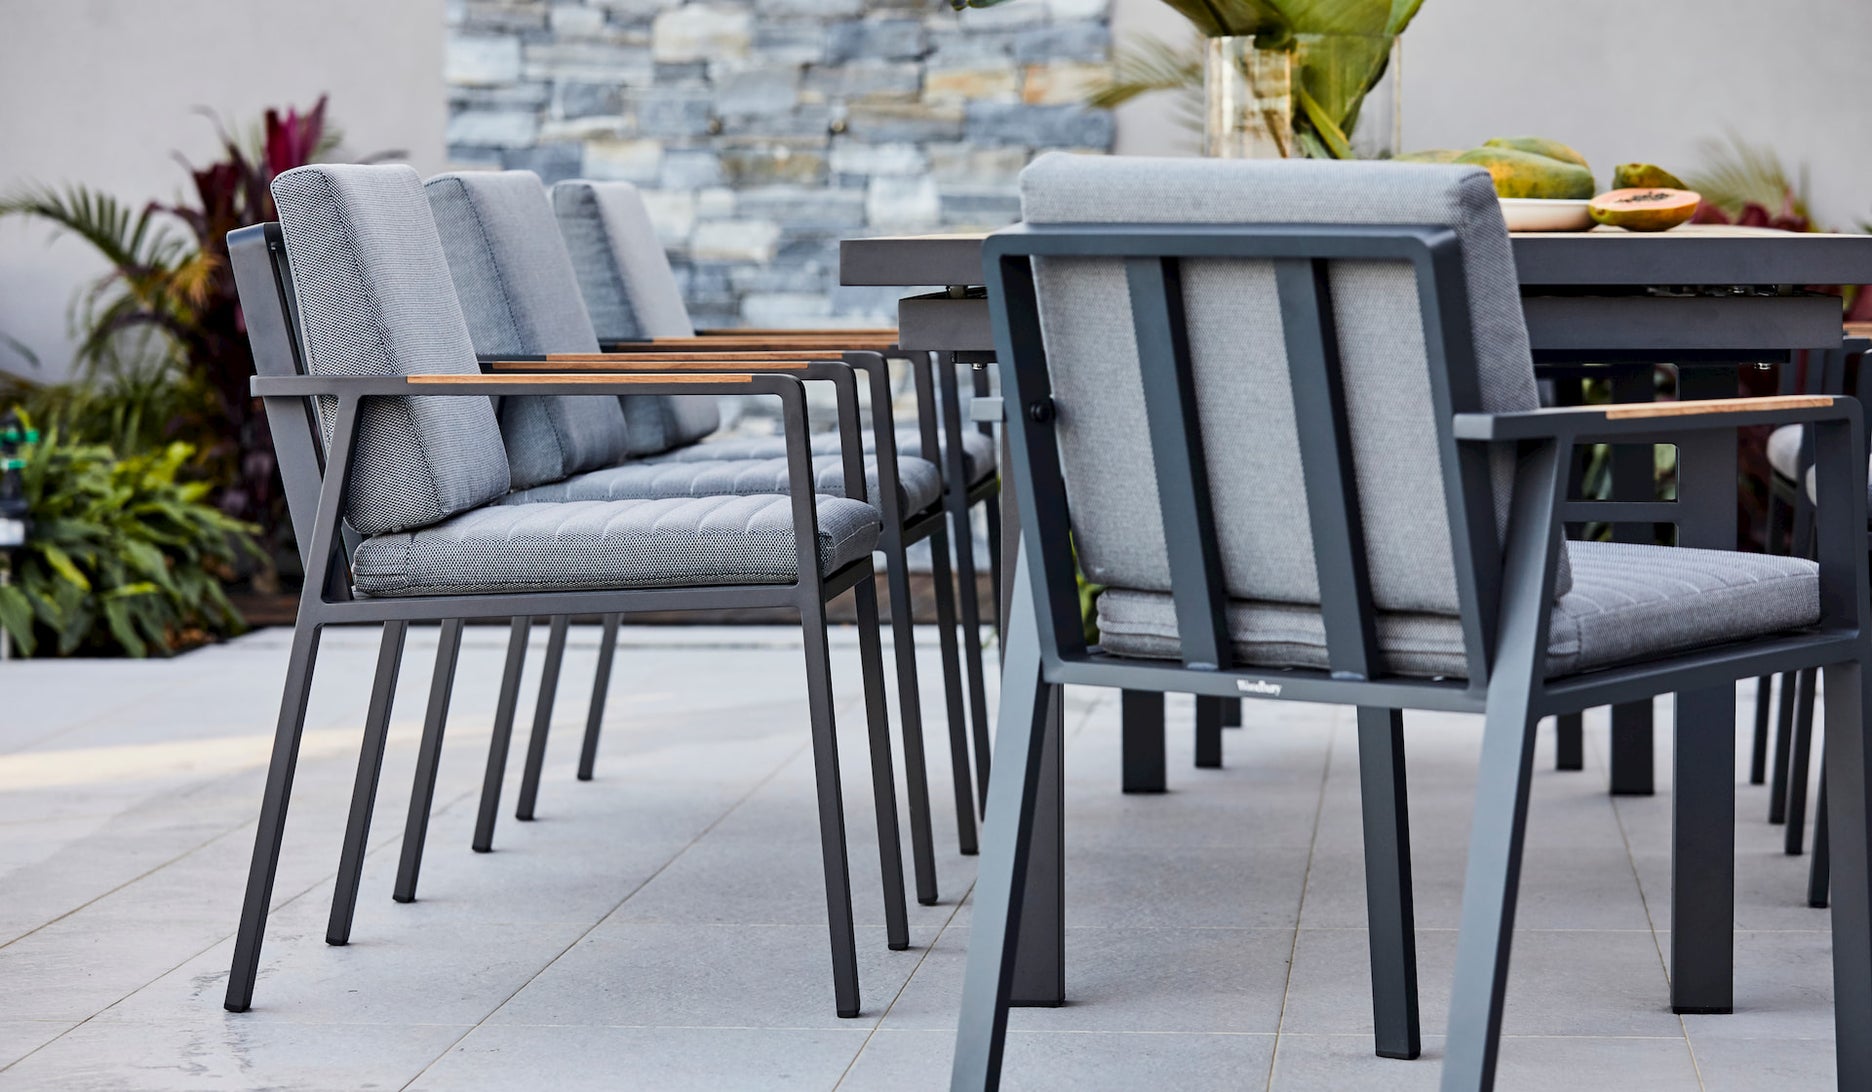 How to choose an outdoor dining set